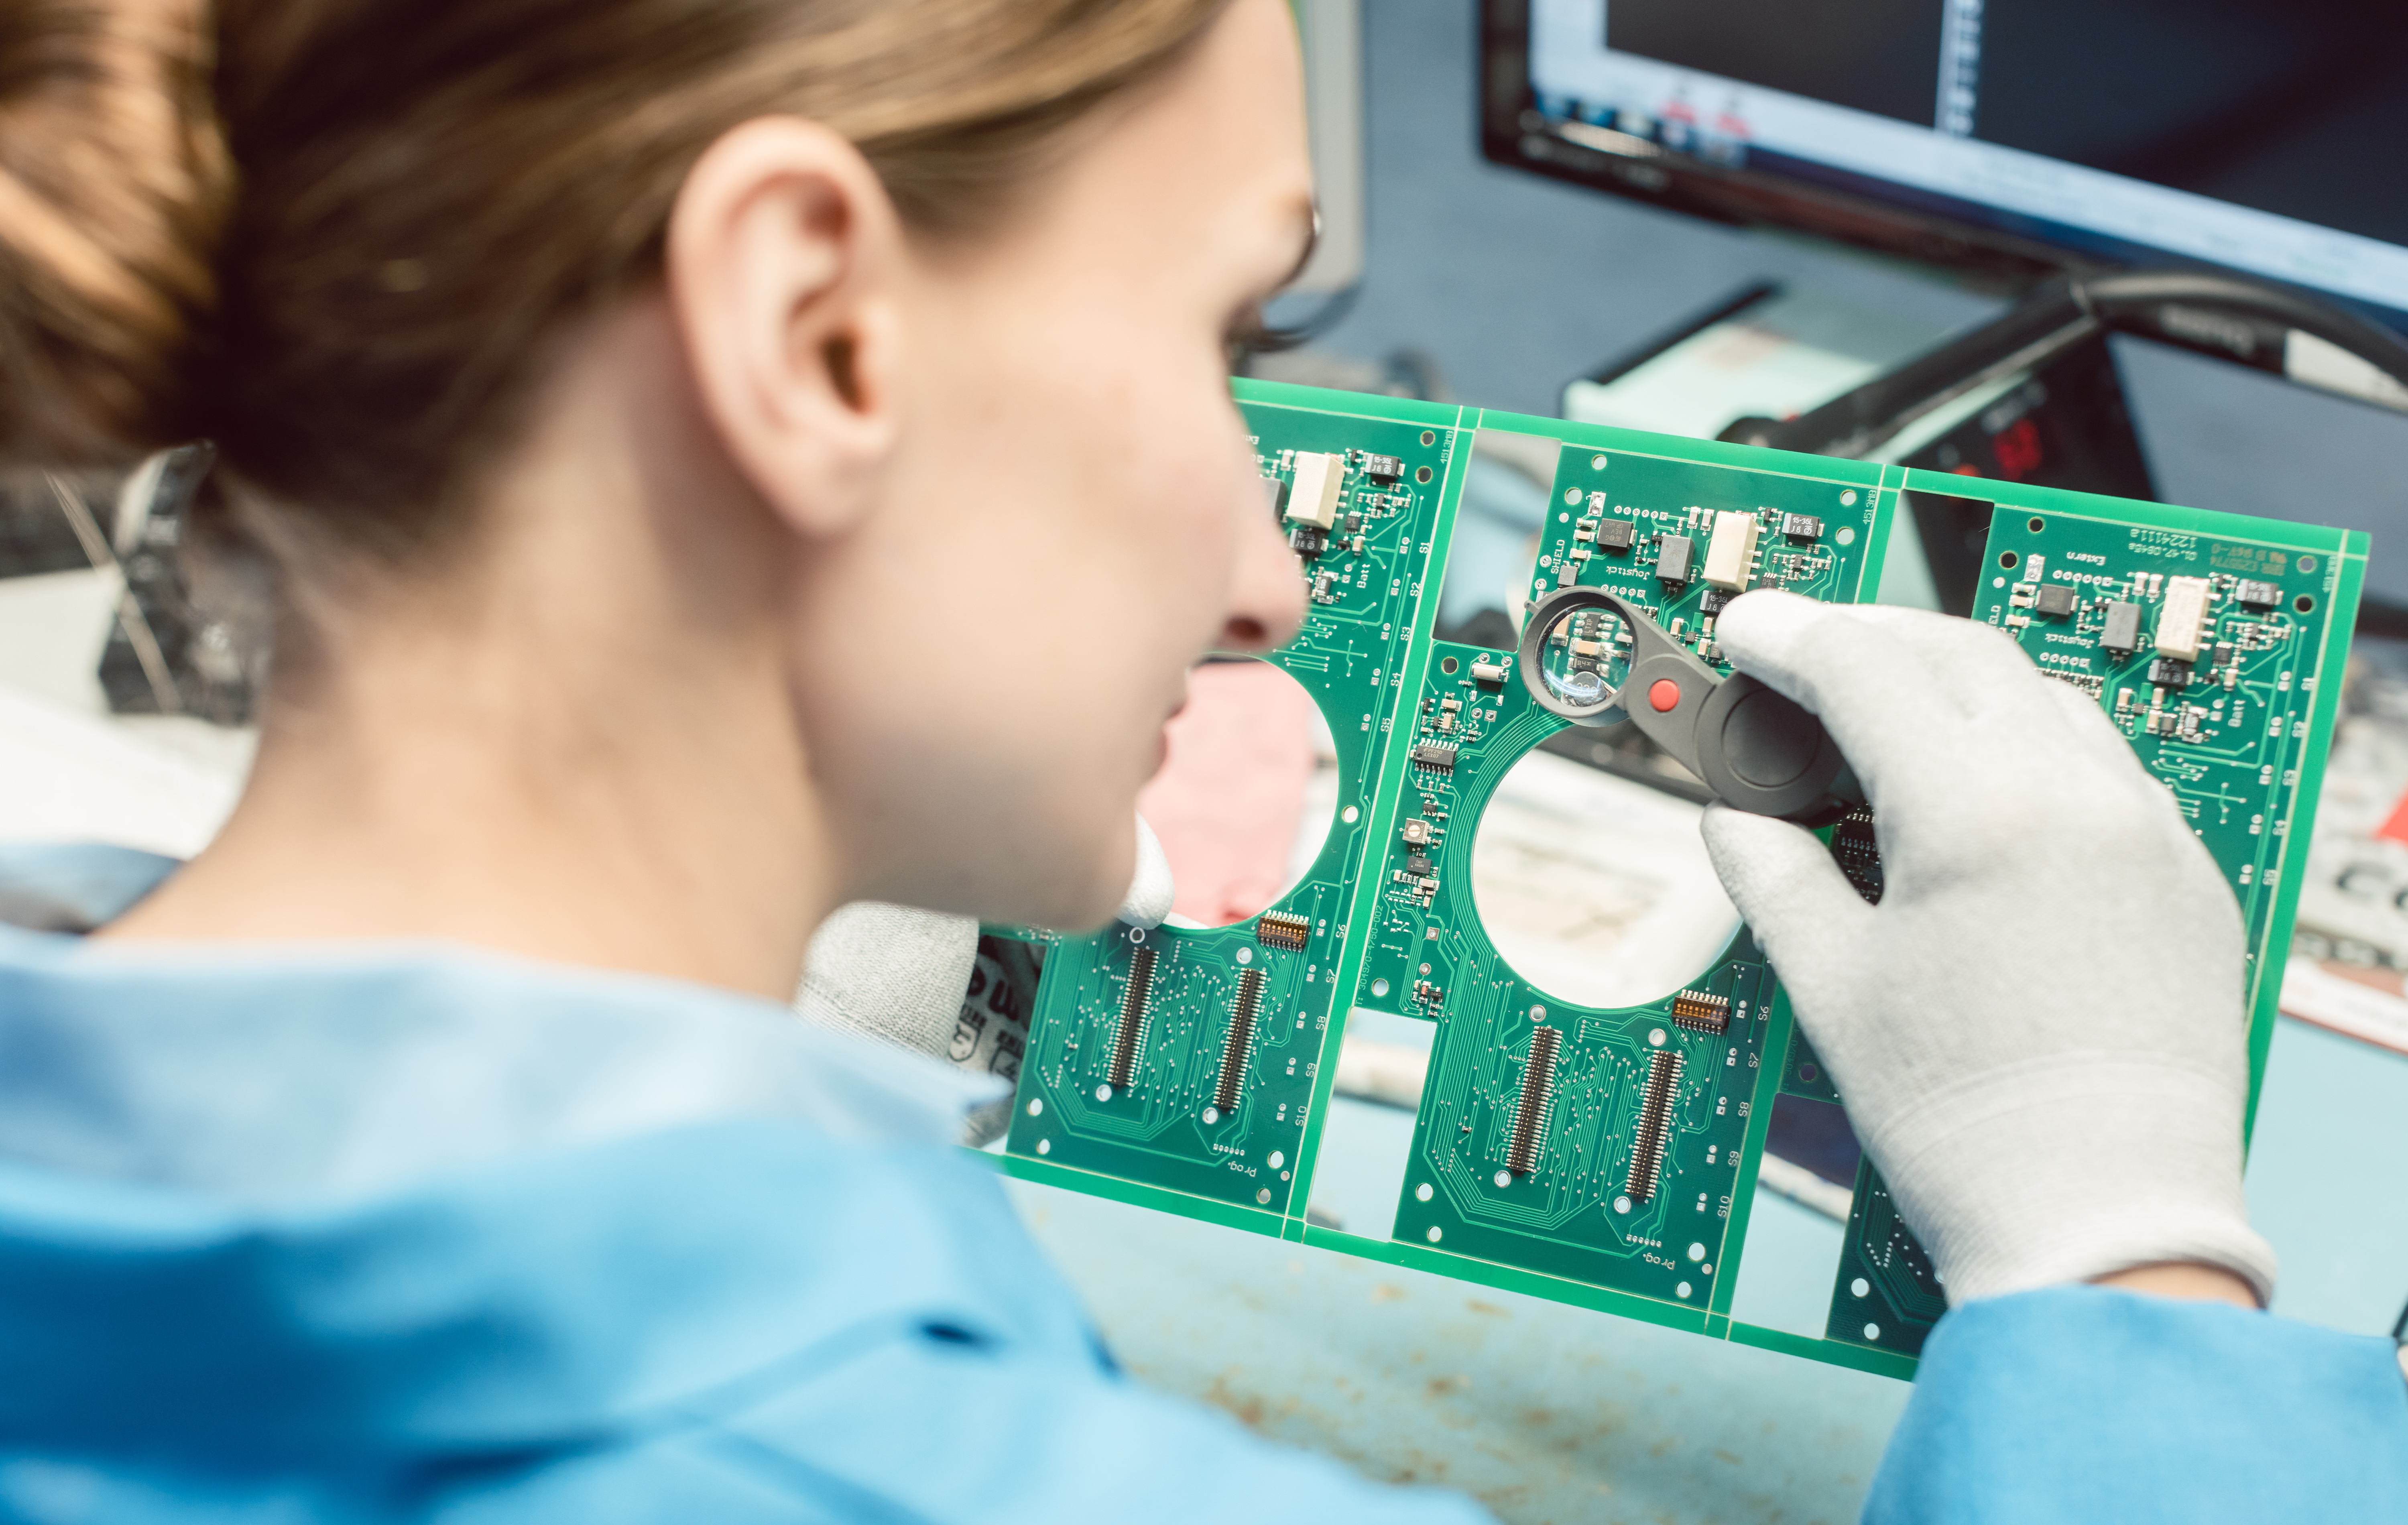 researcher soldering components to a printed circuit board